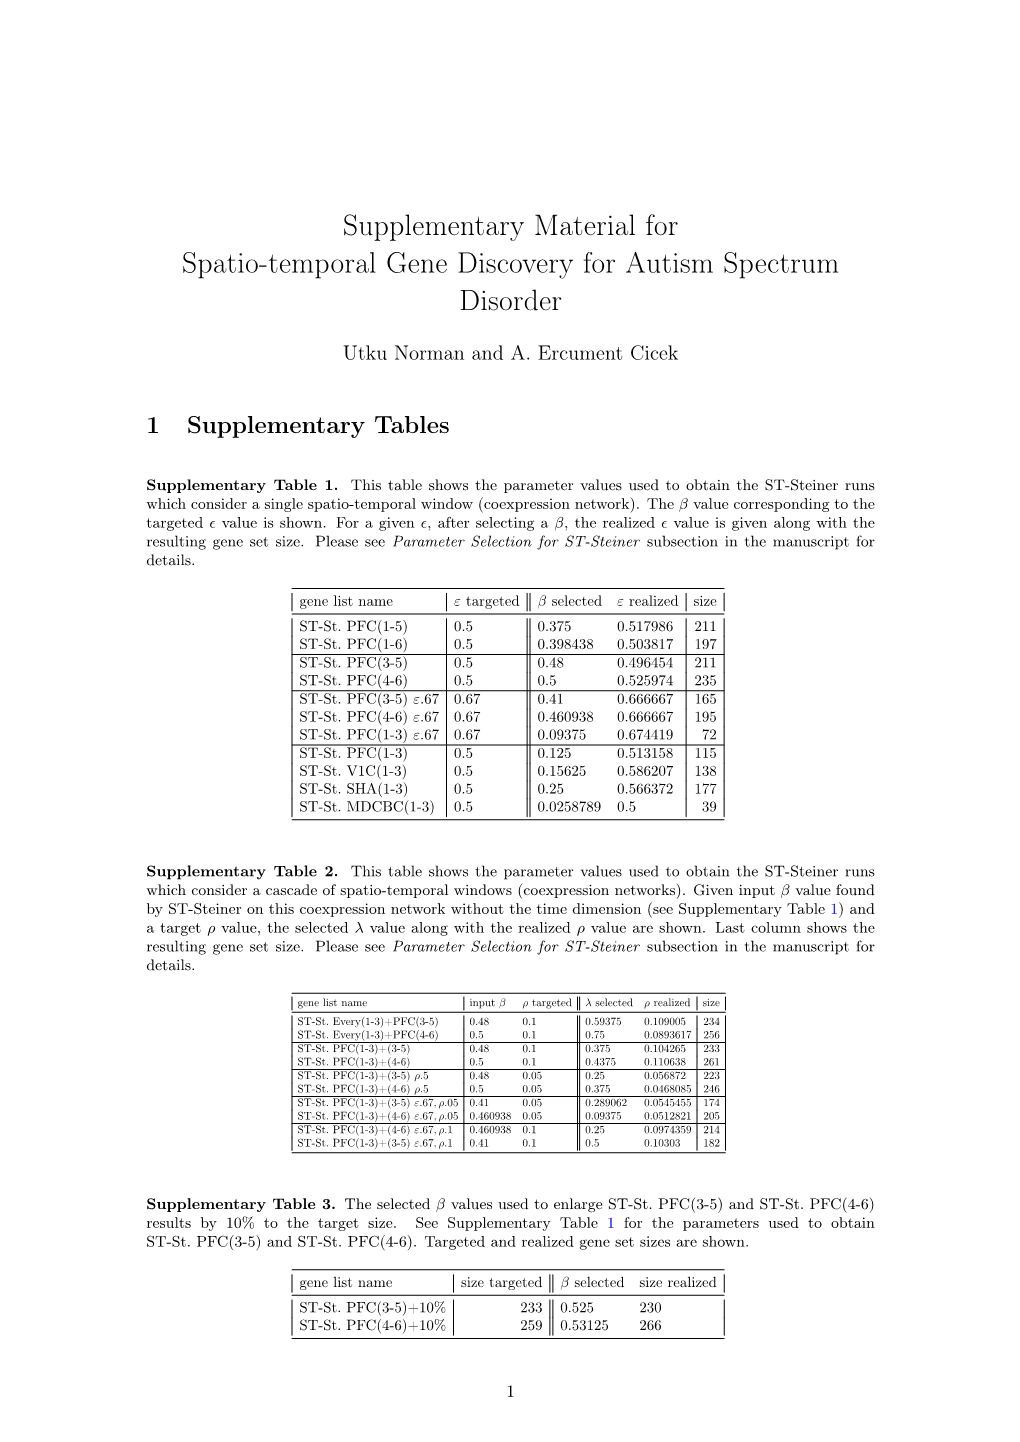 Supplementary Material for Spatio-Temporal Gene Discovery for Autism Spectrum Disorder